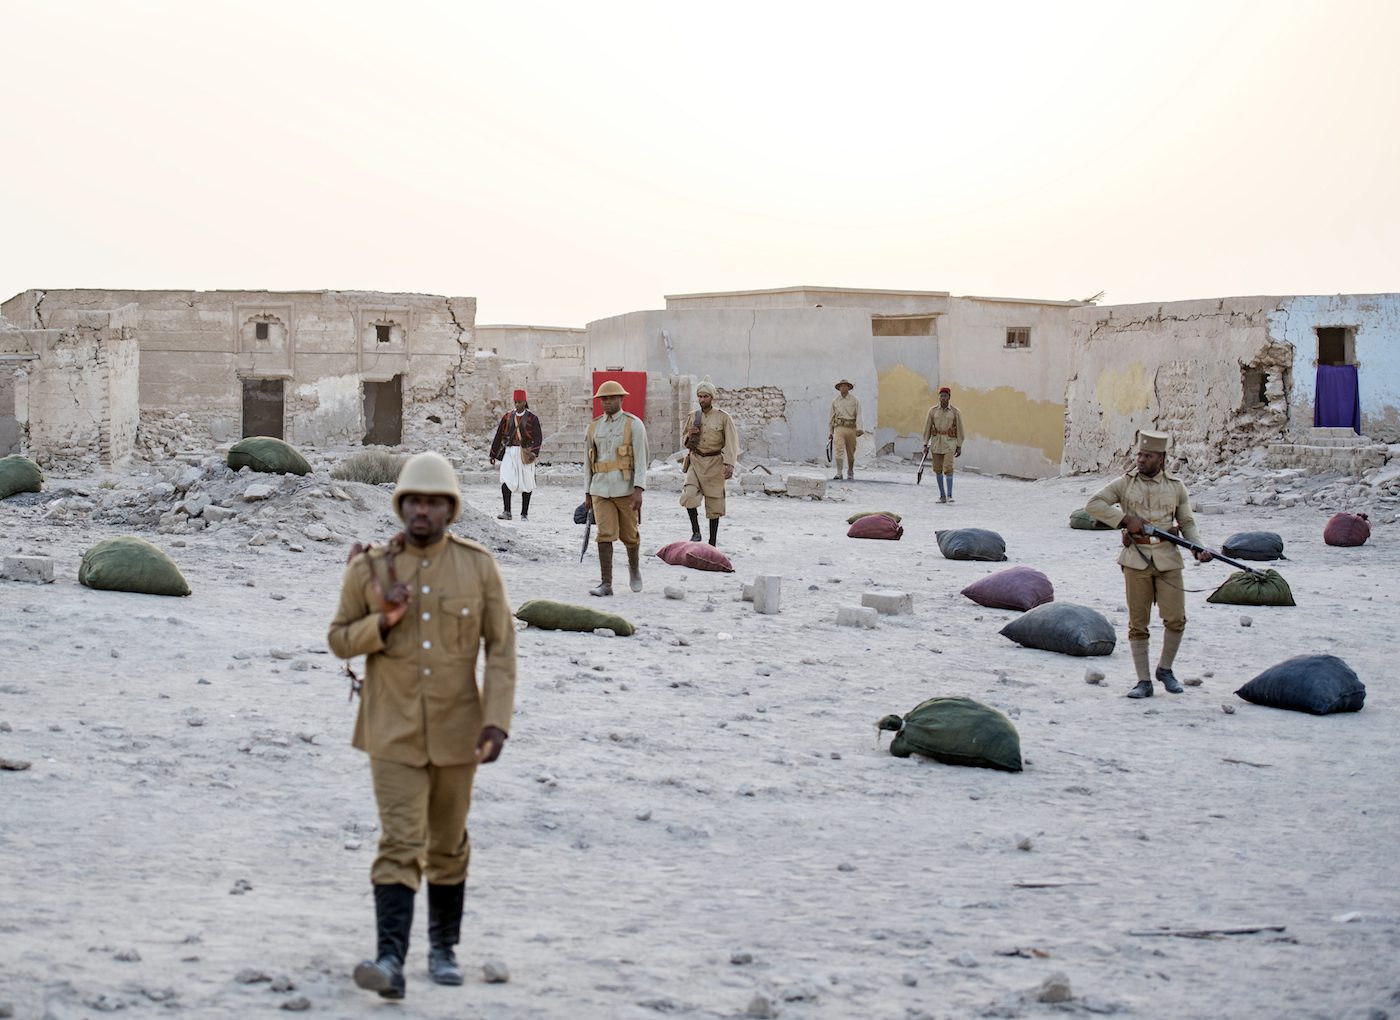 John Akomfrah. Mimesis: African Soldier, 2018. Three channel HD colour video installation, 7.1 sound Dimensions variable. Co-commissioned by 14-18 NOW, New Art Exchange, Nottingham and Smoking Dogs Films, with additional support from Sharjah Art Foundation.
Photo © IWM / Film © Smoking Dogs Films